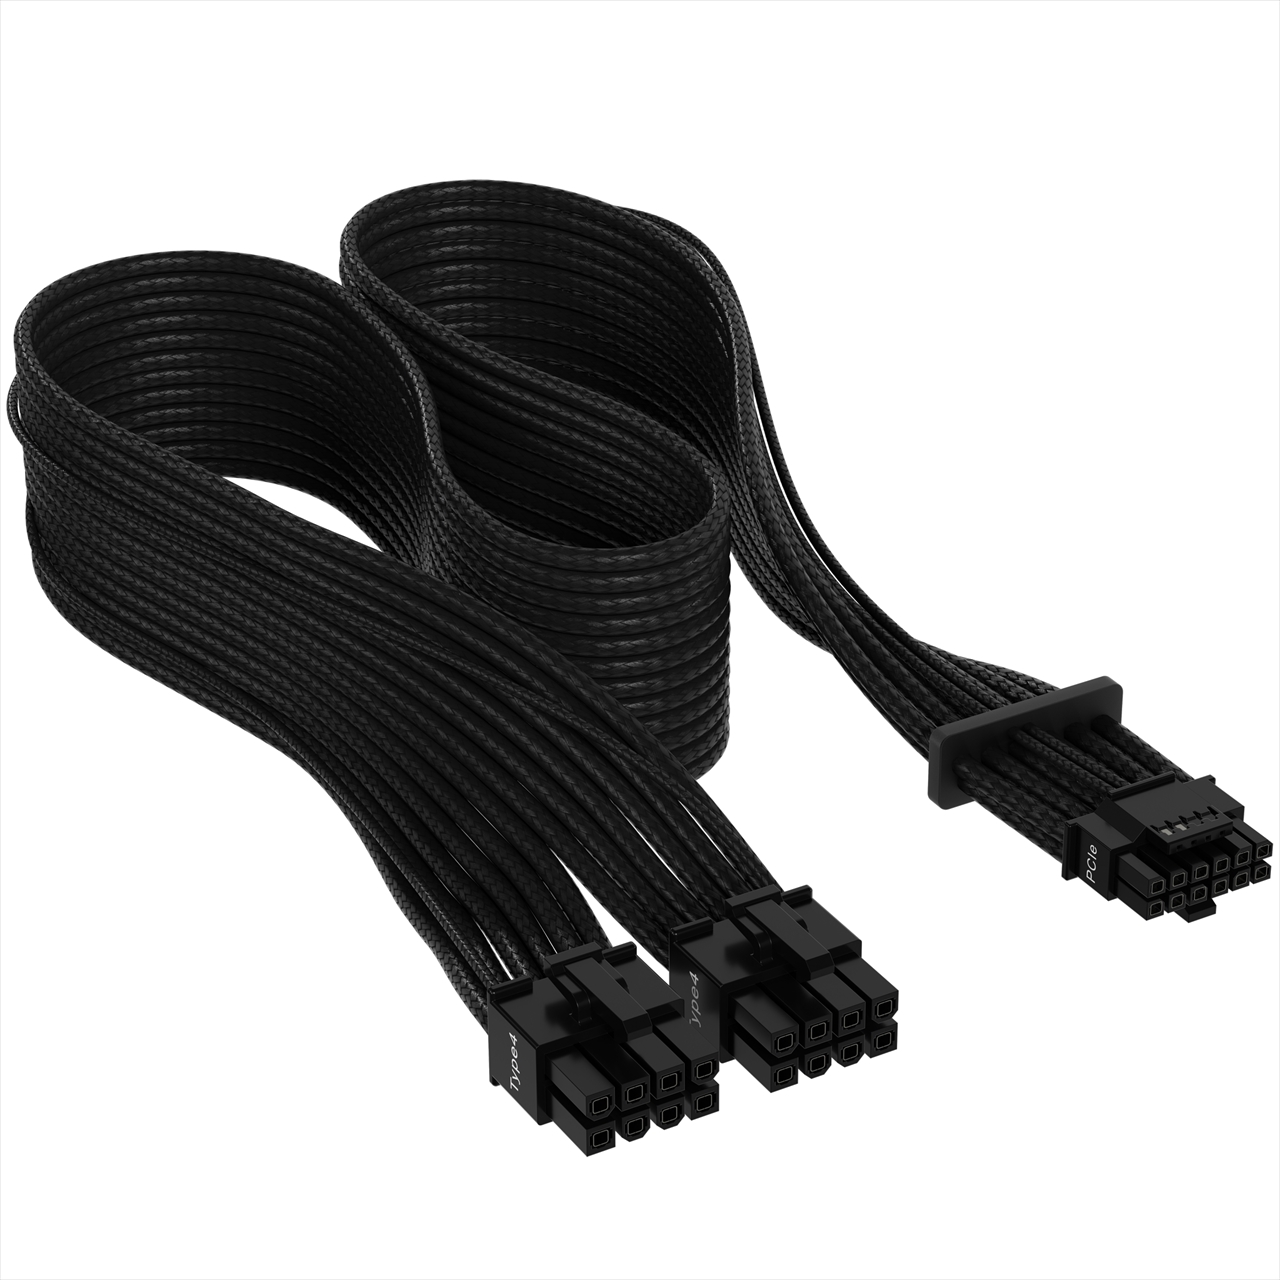 PCIe 5.0 12VHPWR PSU Individually Sleeved Cable Black (CP-8920331) | その他 電源 | PCパーツと自作パソコン・組み立てパソコンの専門店 | 1's PCワンズ